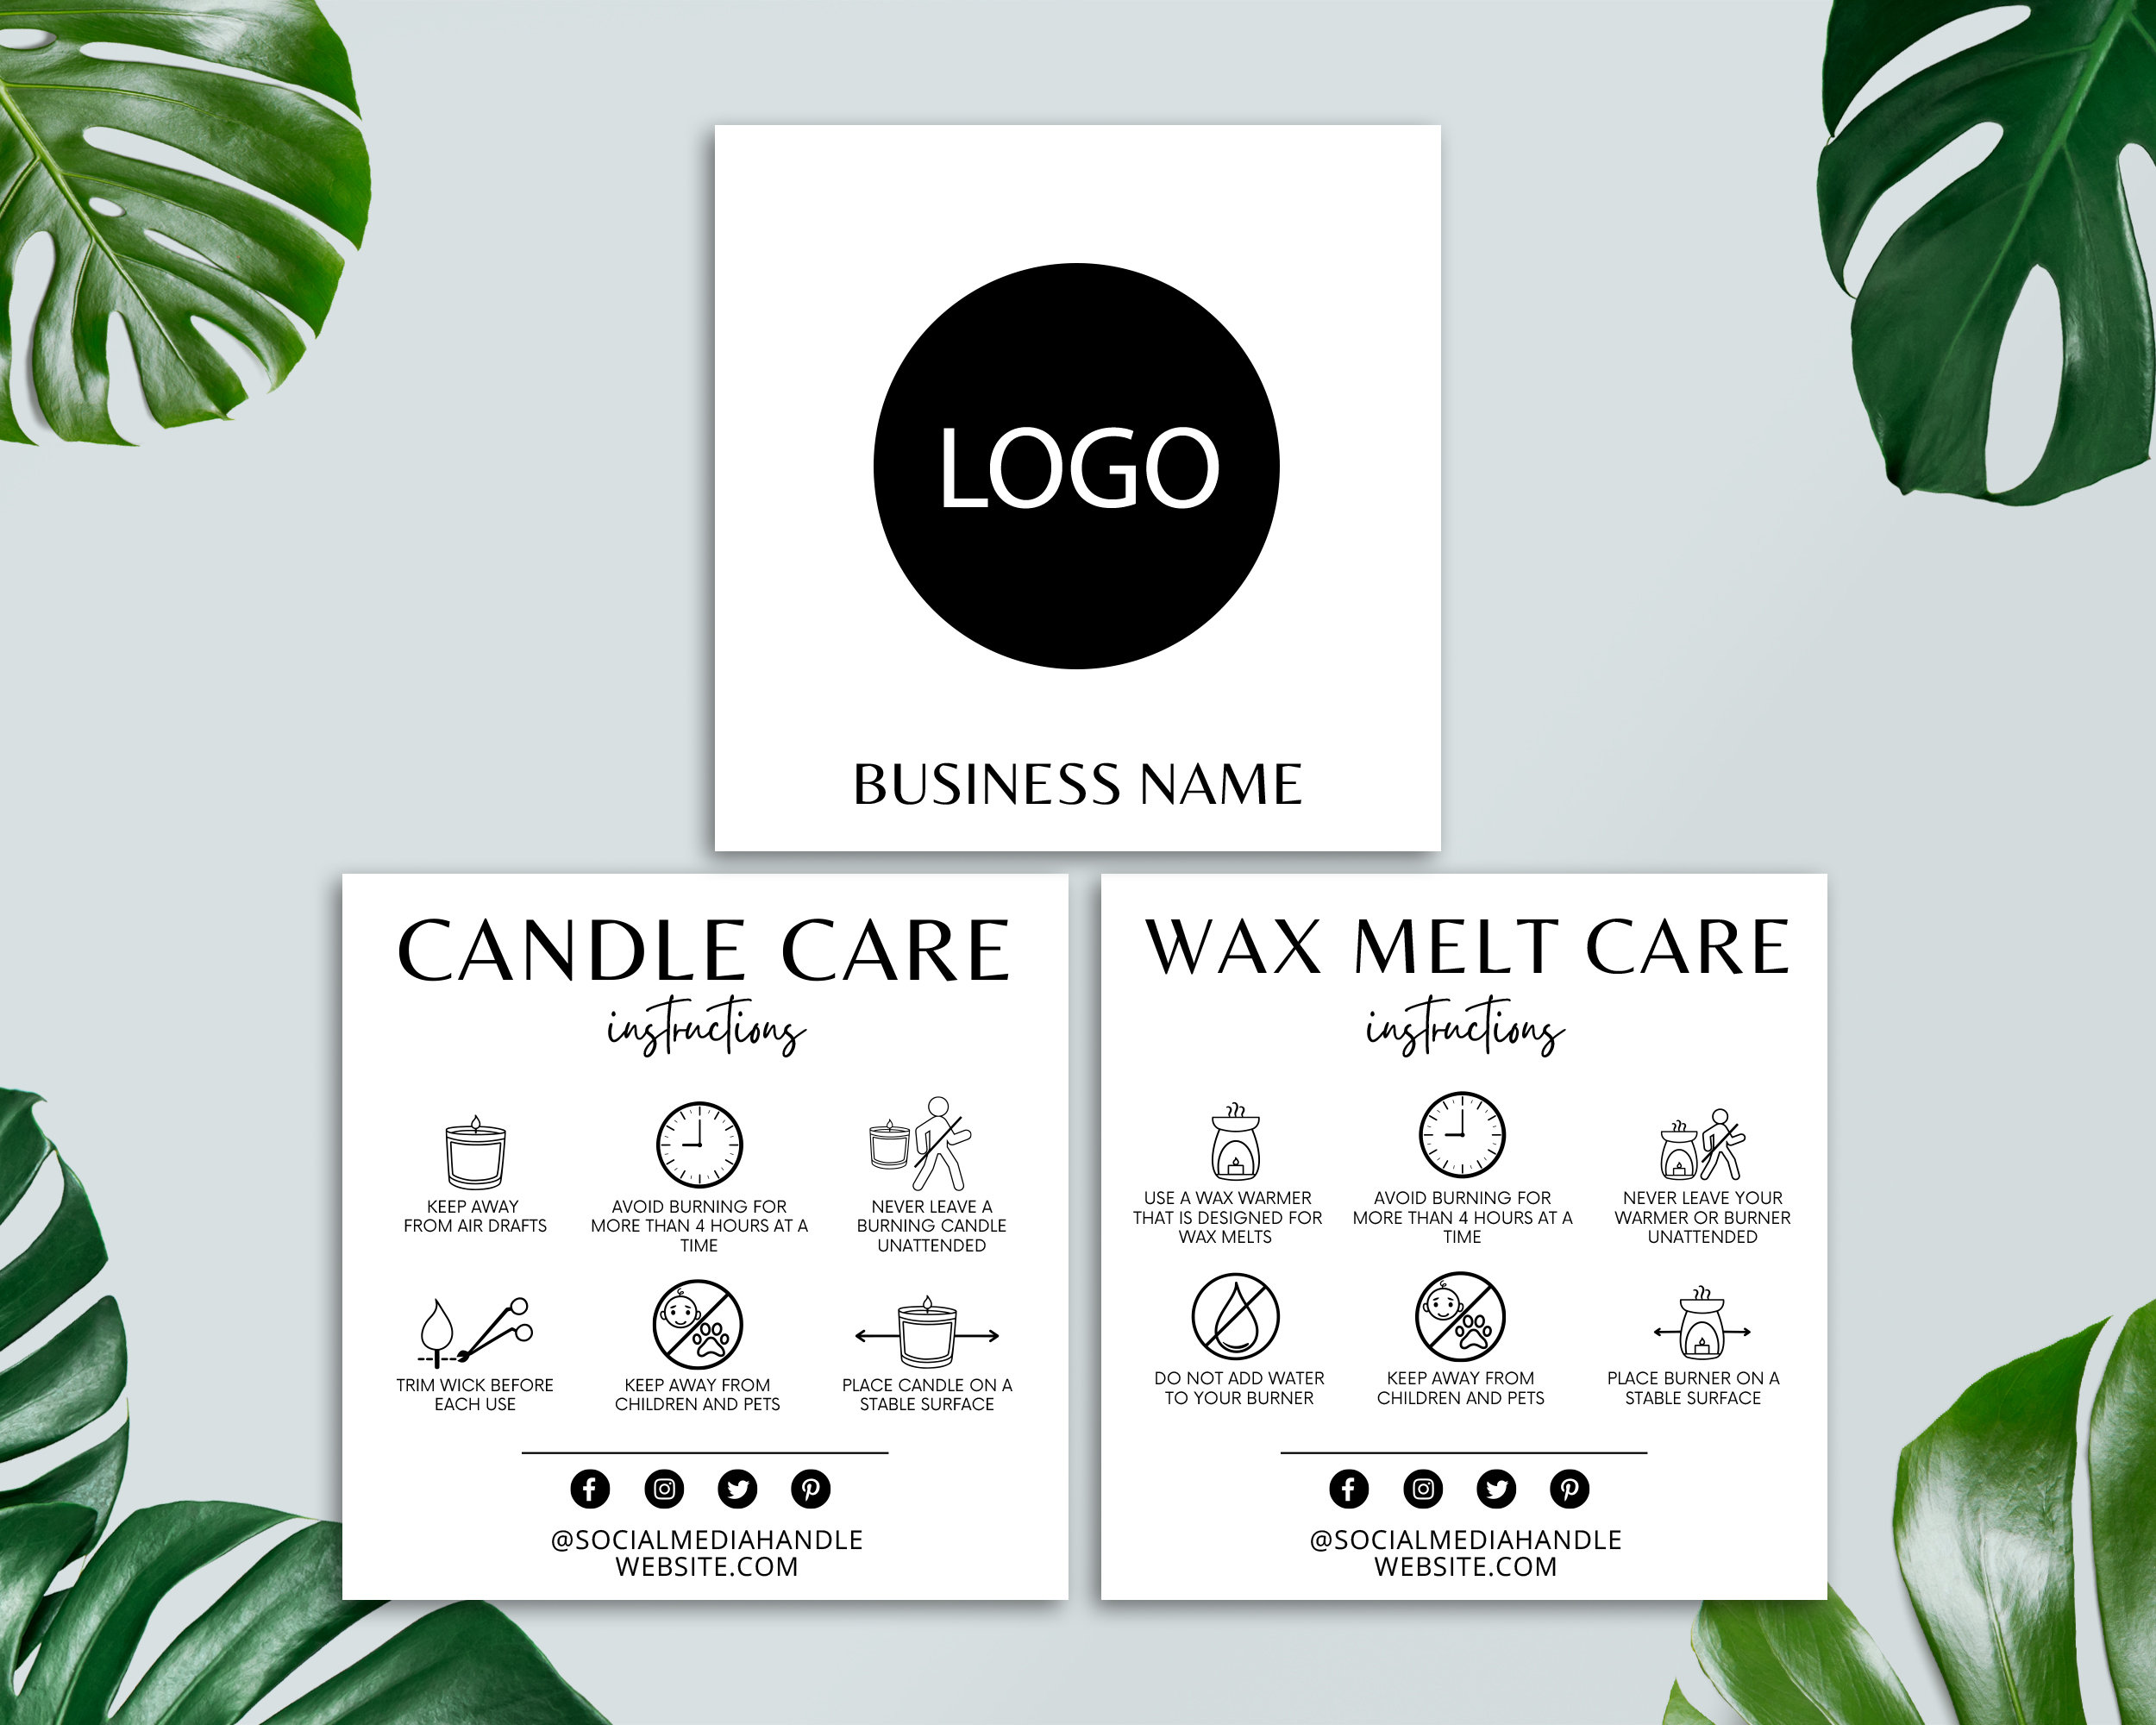 Wooden Wick Candle Safety Guide, Candle Care Card Template, Minimalist  Wooden Wick Candle Warning Instructions, Black & White, Instant M-001 